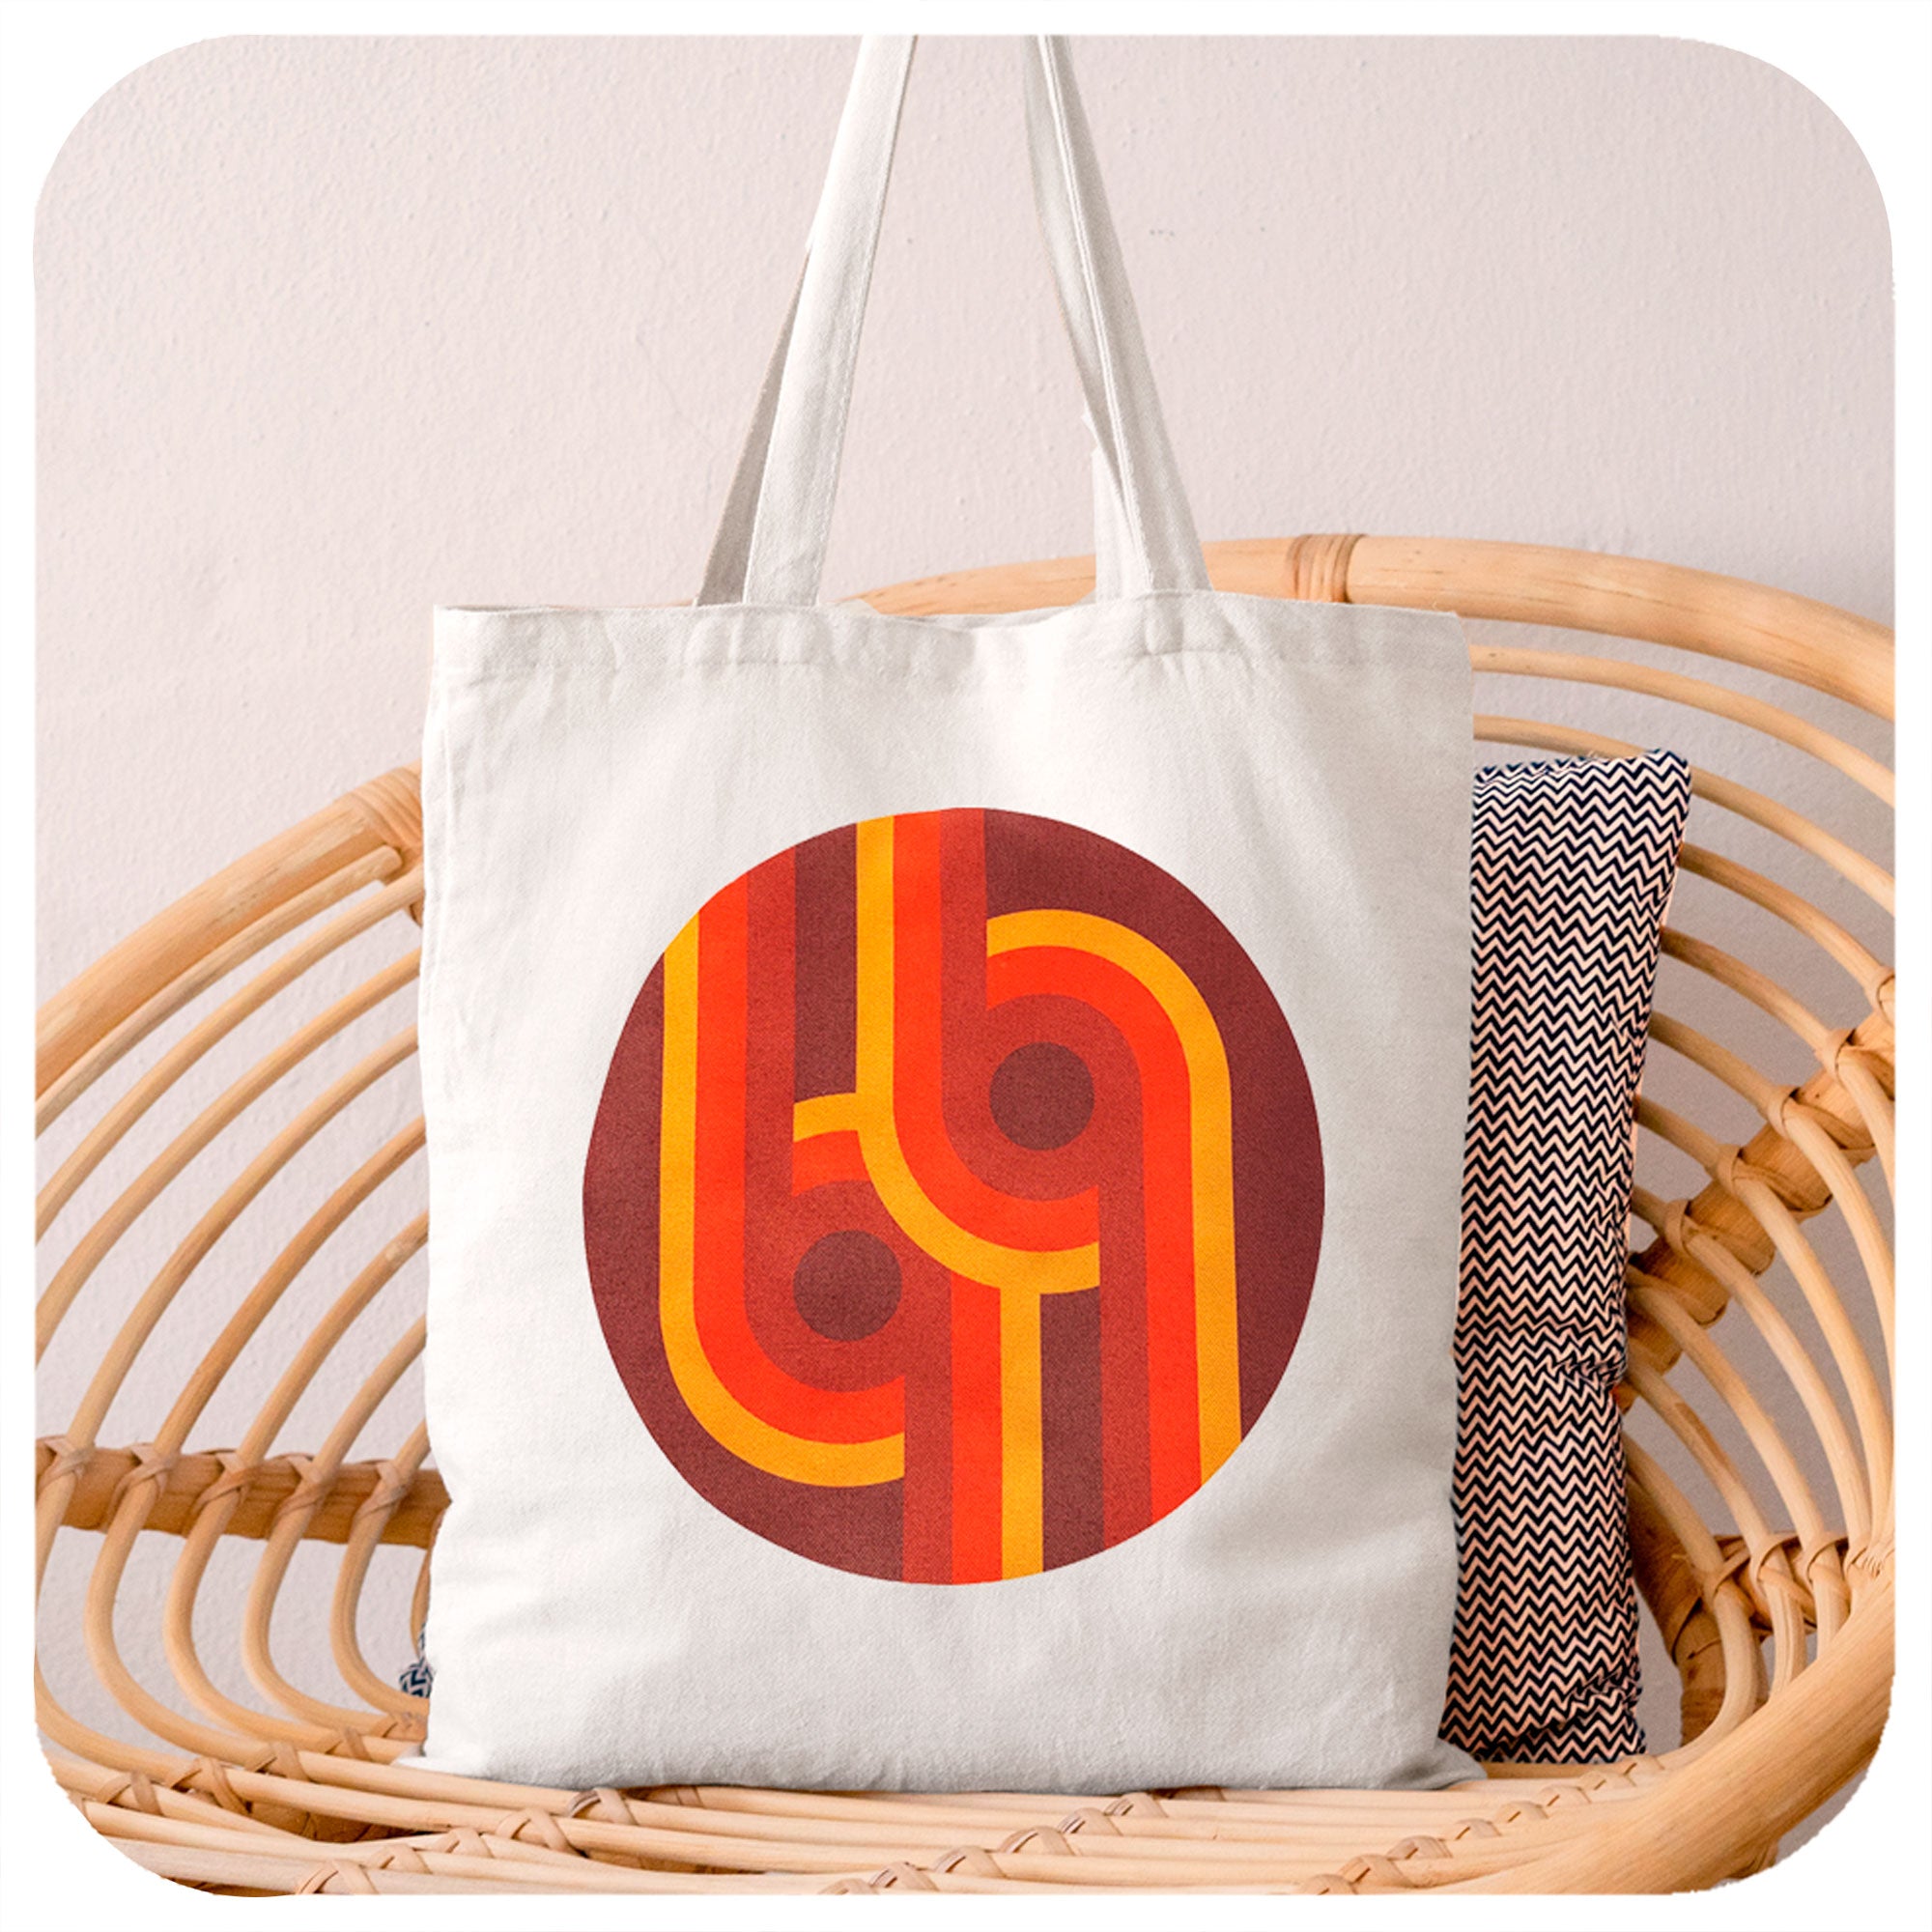 A canvas style tote bag featuring a 70s supergaphic print sits on a rattan chair | The Inkabilly Emporium